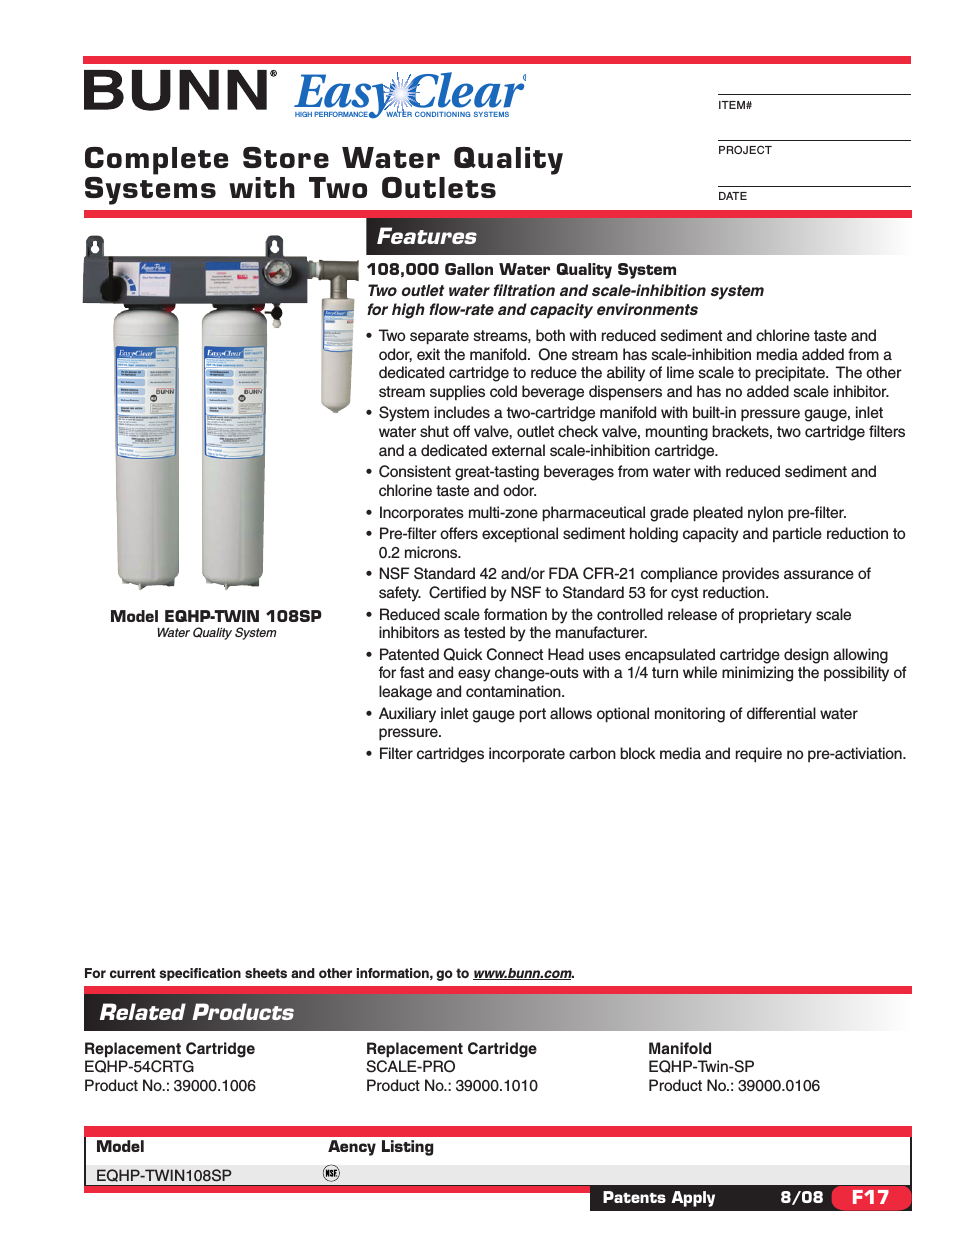 Water Quality System EQHP-TWIN 108SP